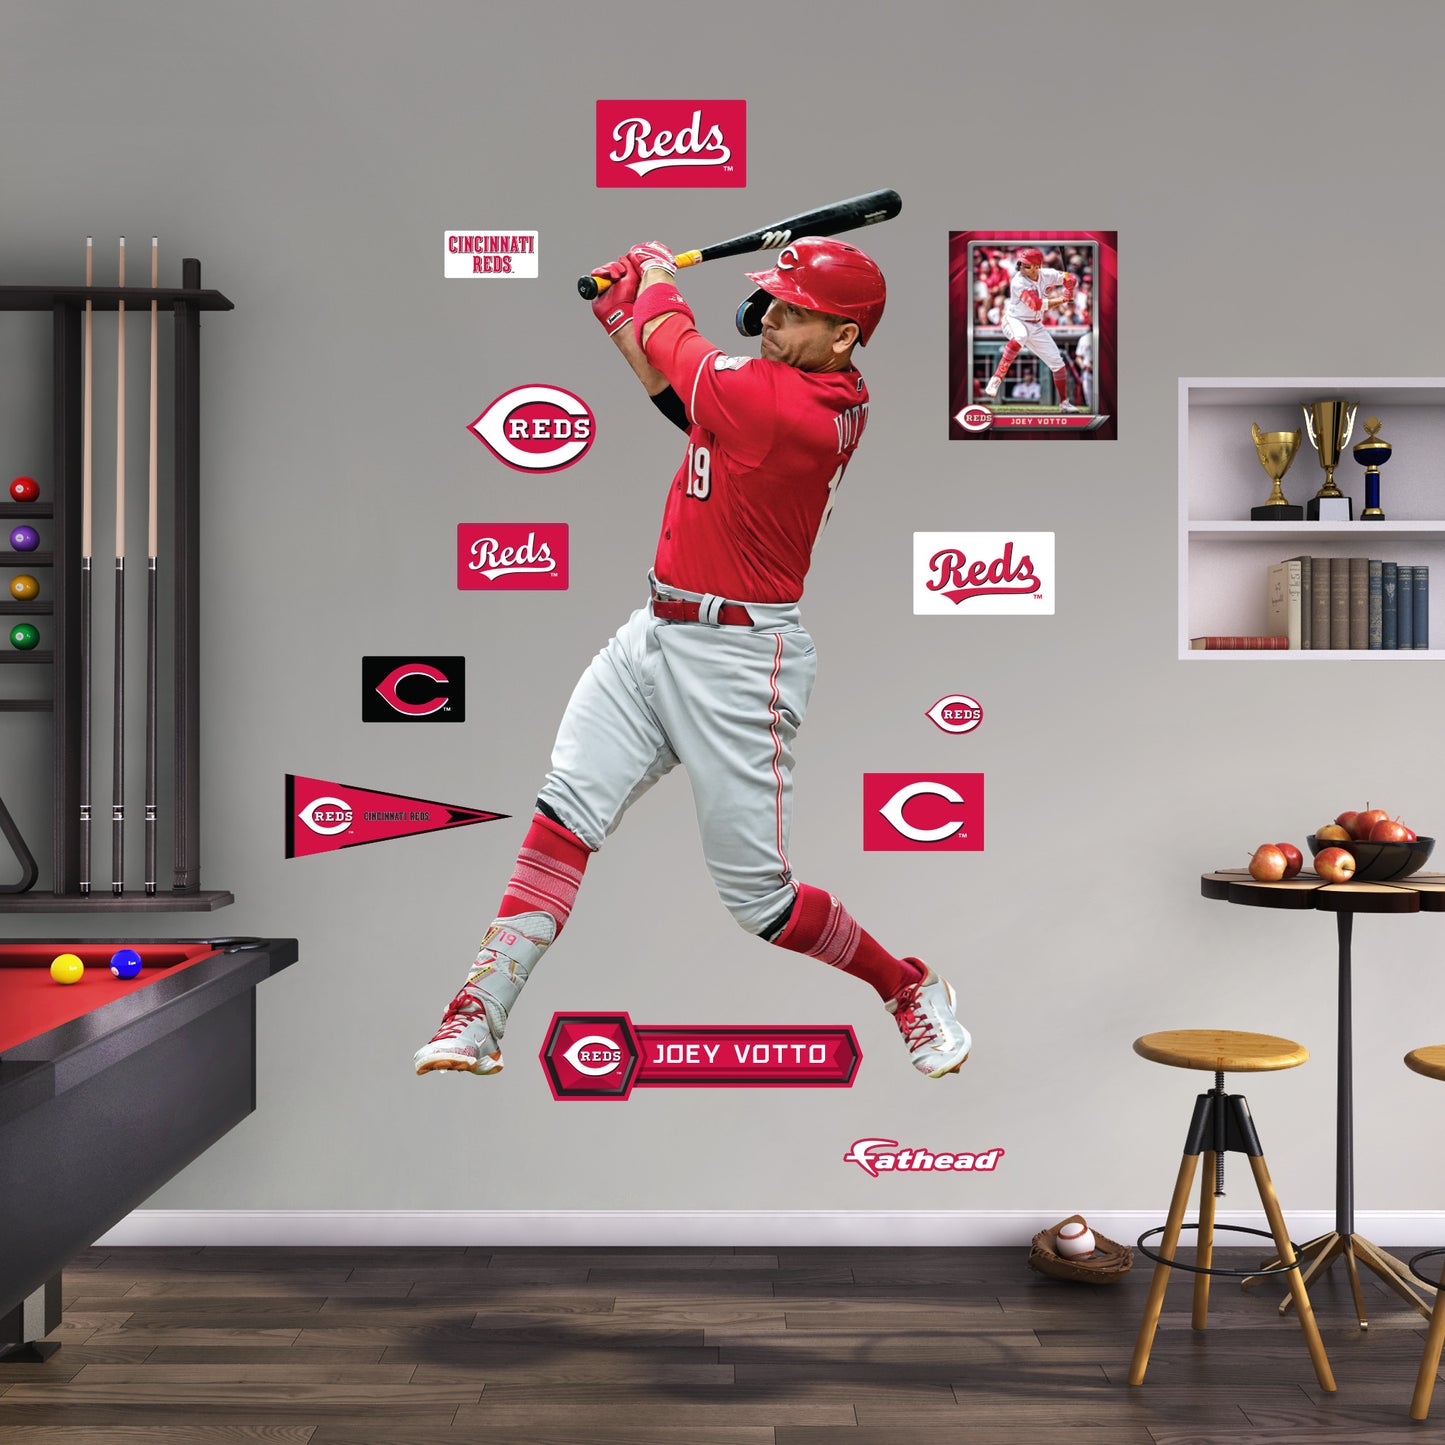 Cincinnati Reds: Joey Votto         - Officially Licensed MLB Removable     Adhesive Decal